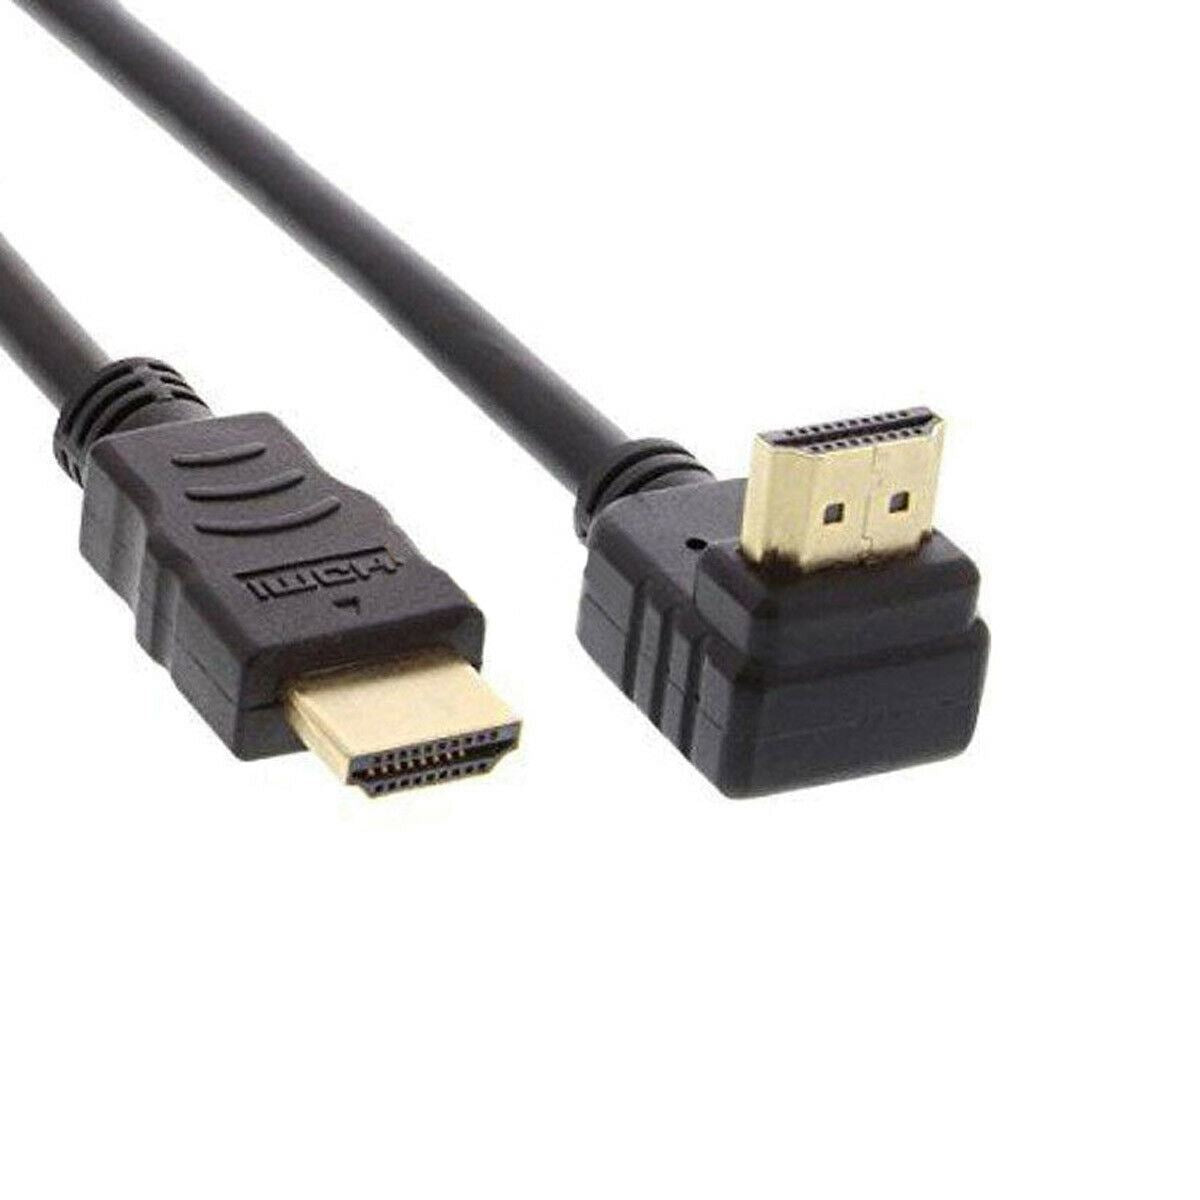 8m Right Angled HDMI Cable Compatible With Set-Top Boxes,DVDs,PC's & Digital TVs